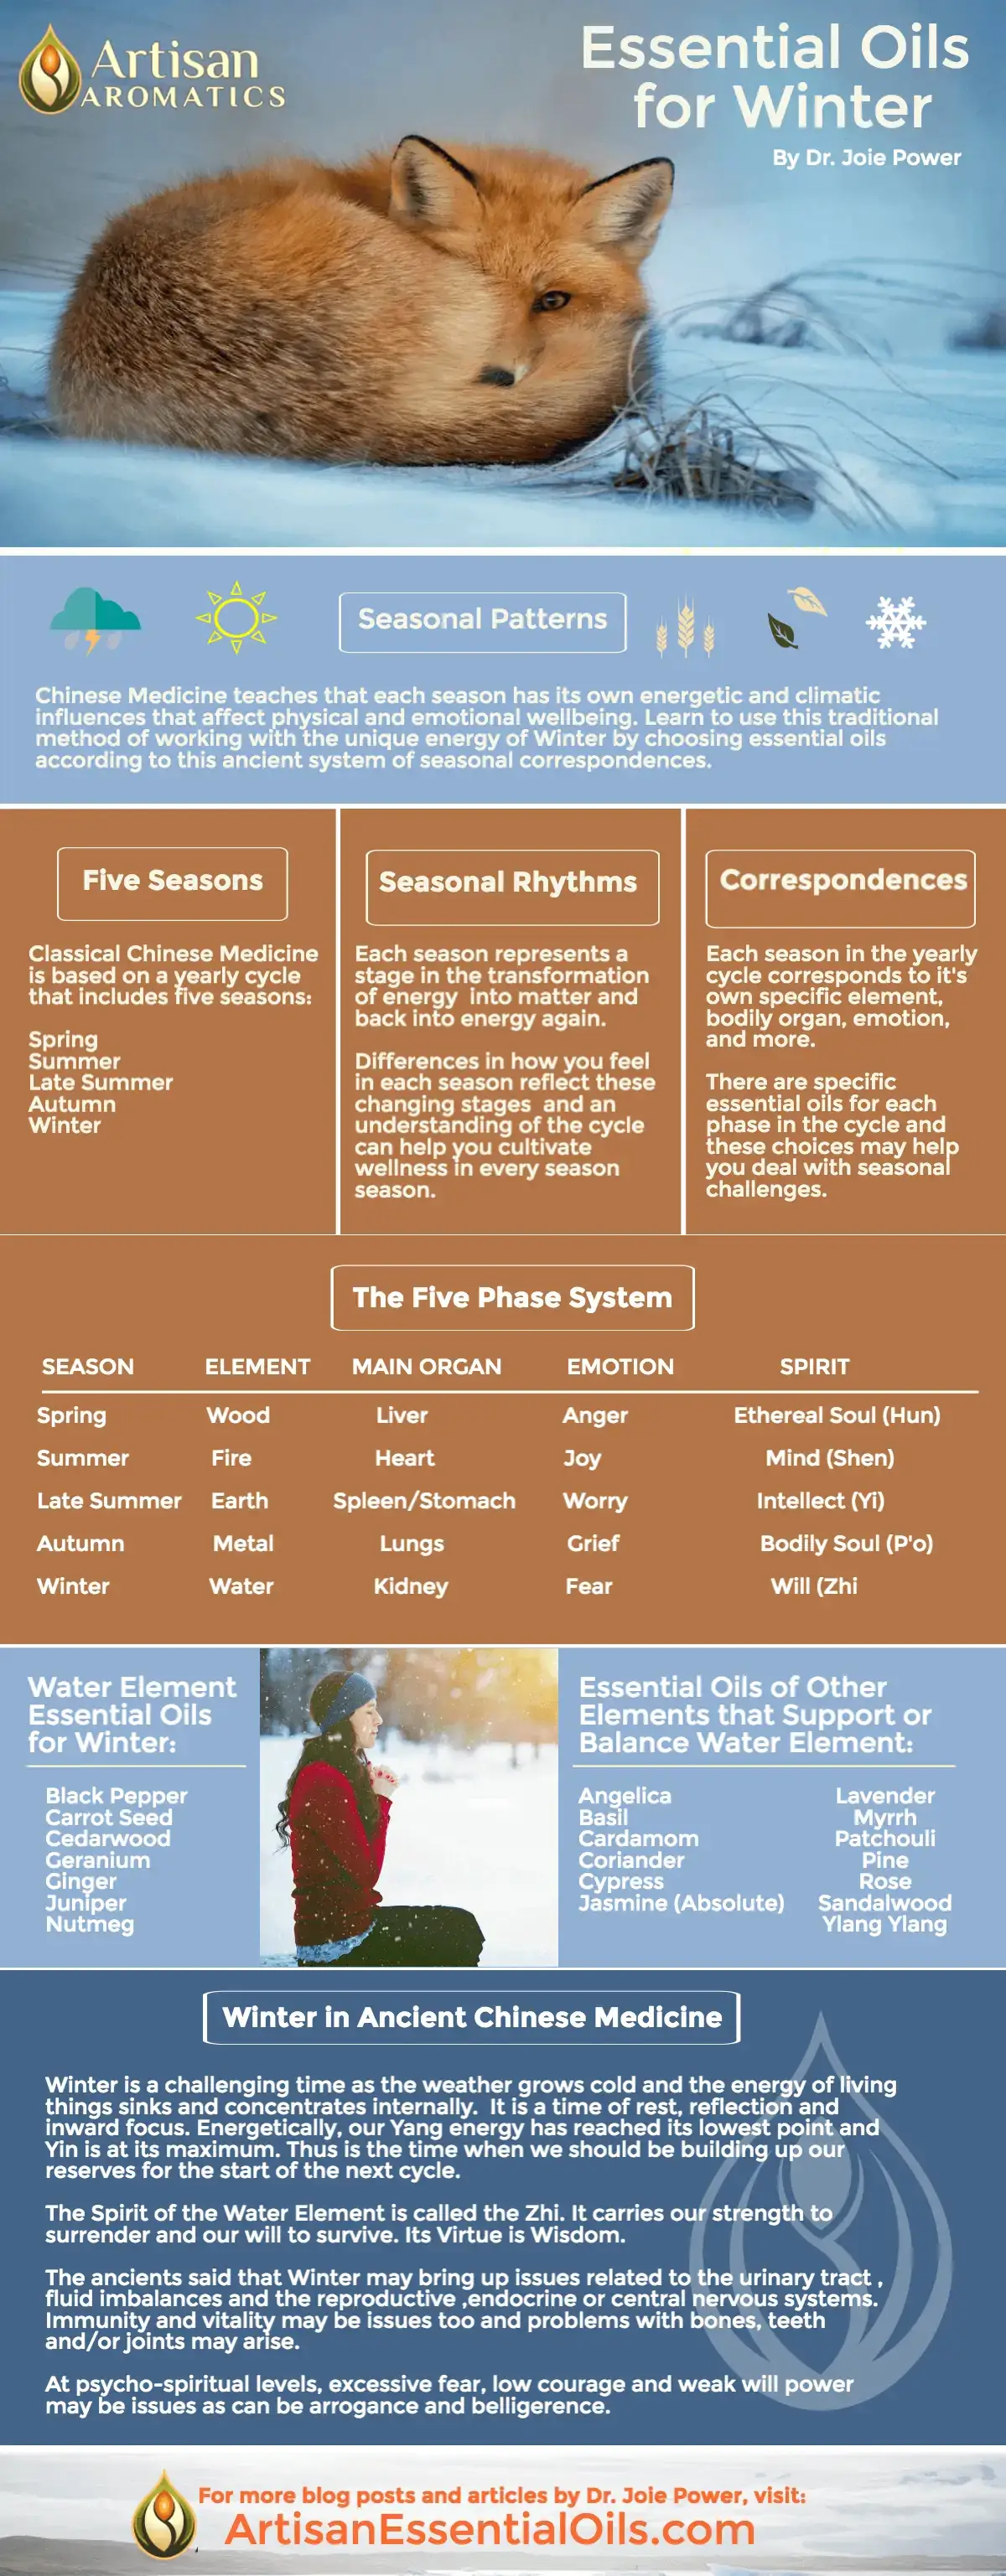 Winter Aromatherapy Infographic by Dr. Joie Power Artisan Aromatics